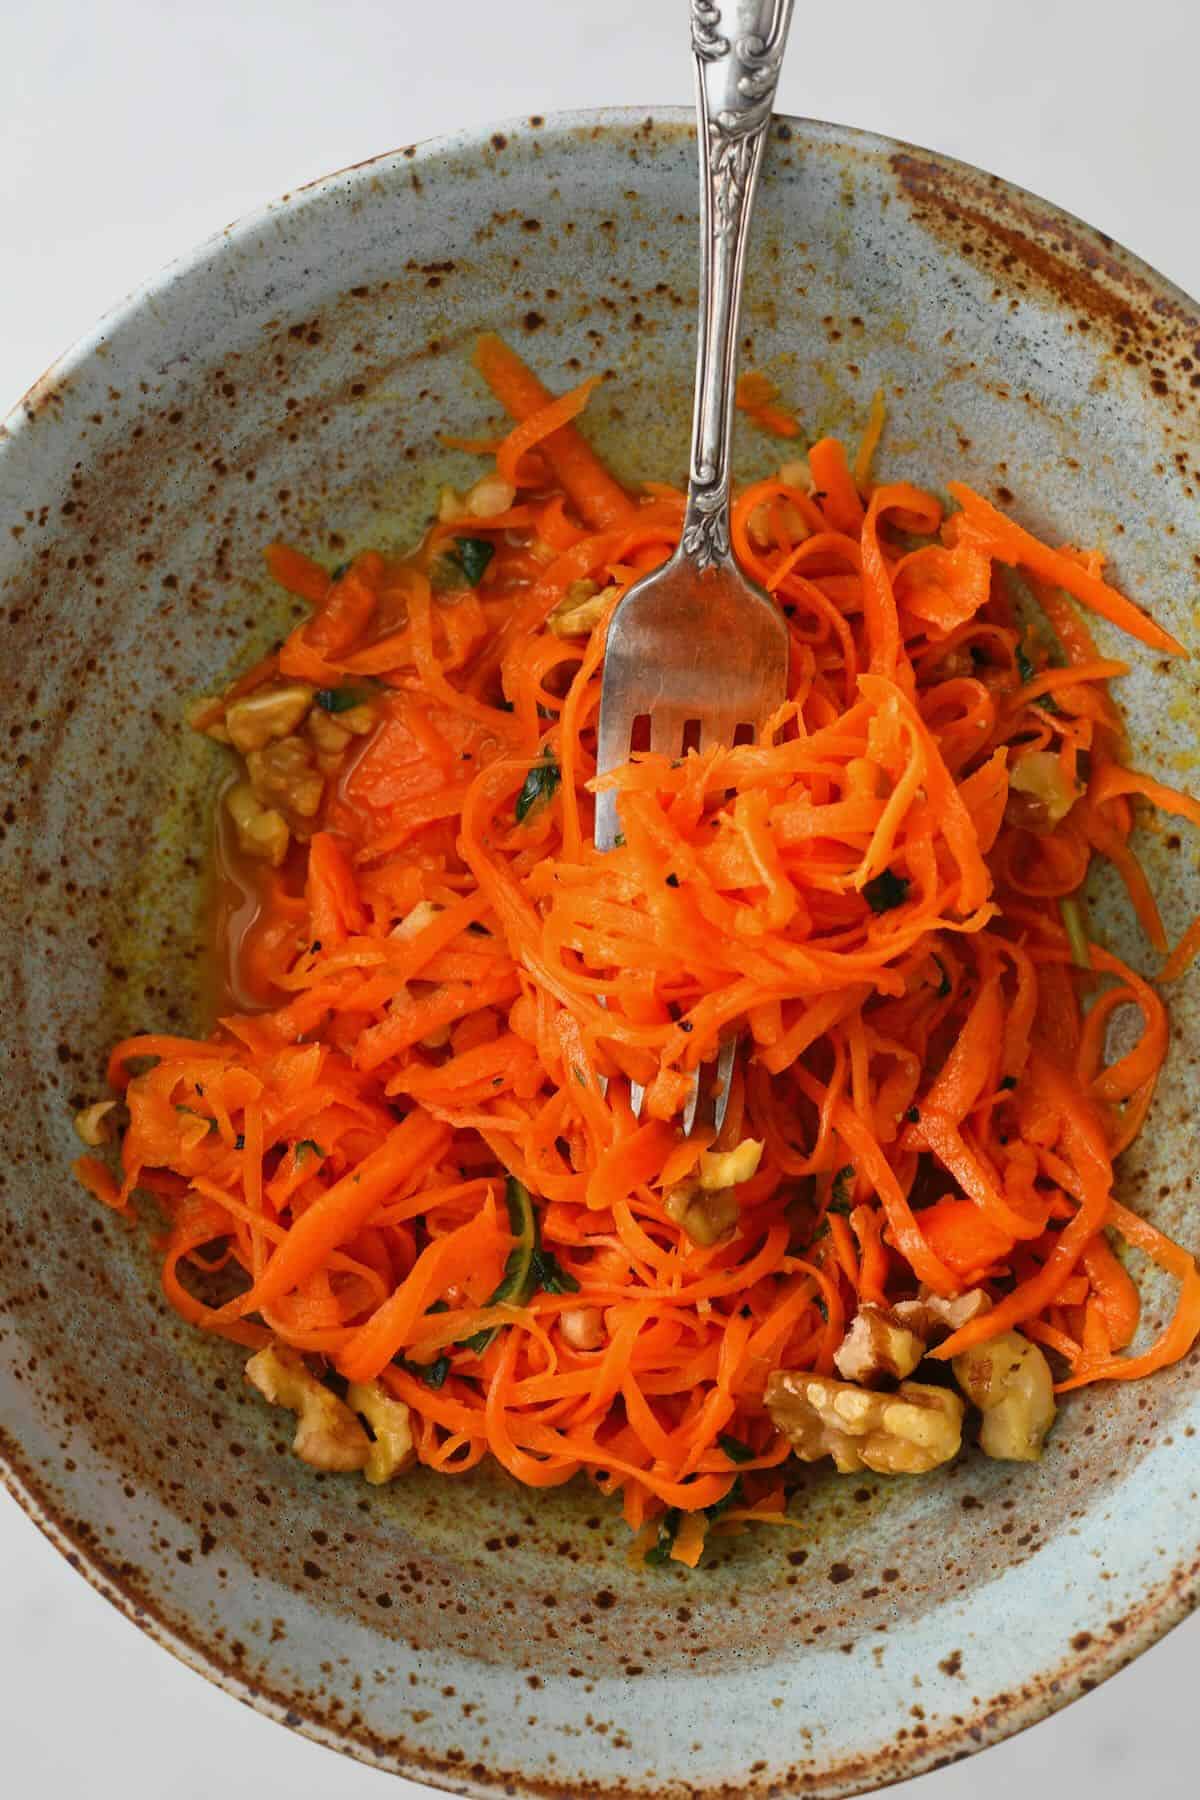 A serving of carrot salad topped with walnuts